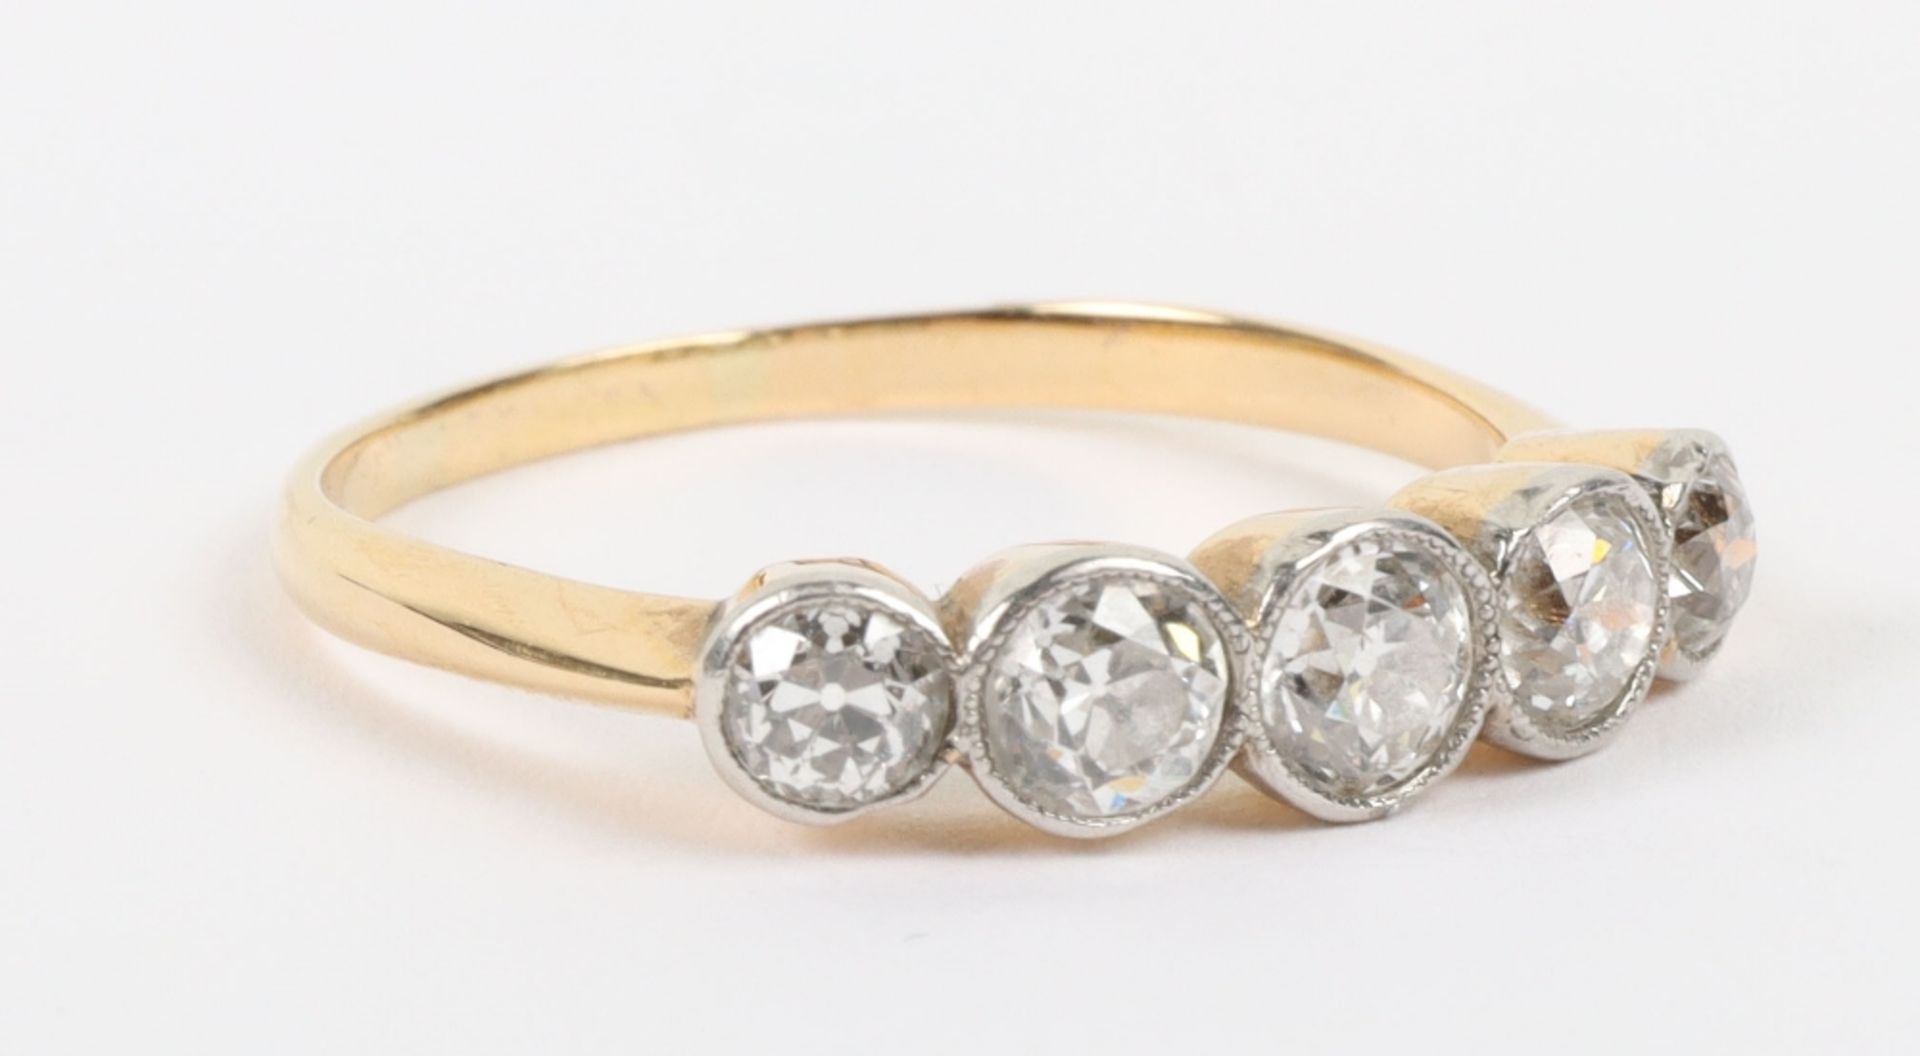 Early 20th century 18ct gold and five stone diamond ring